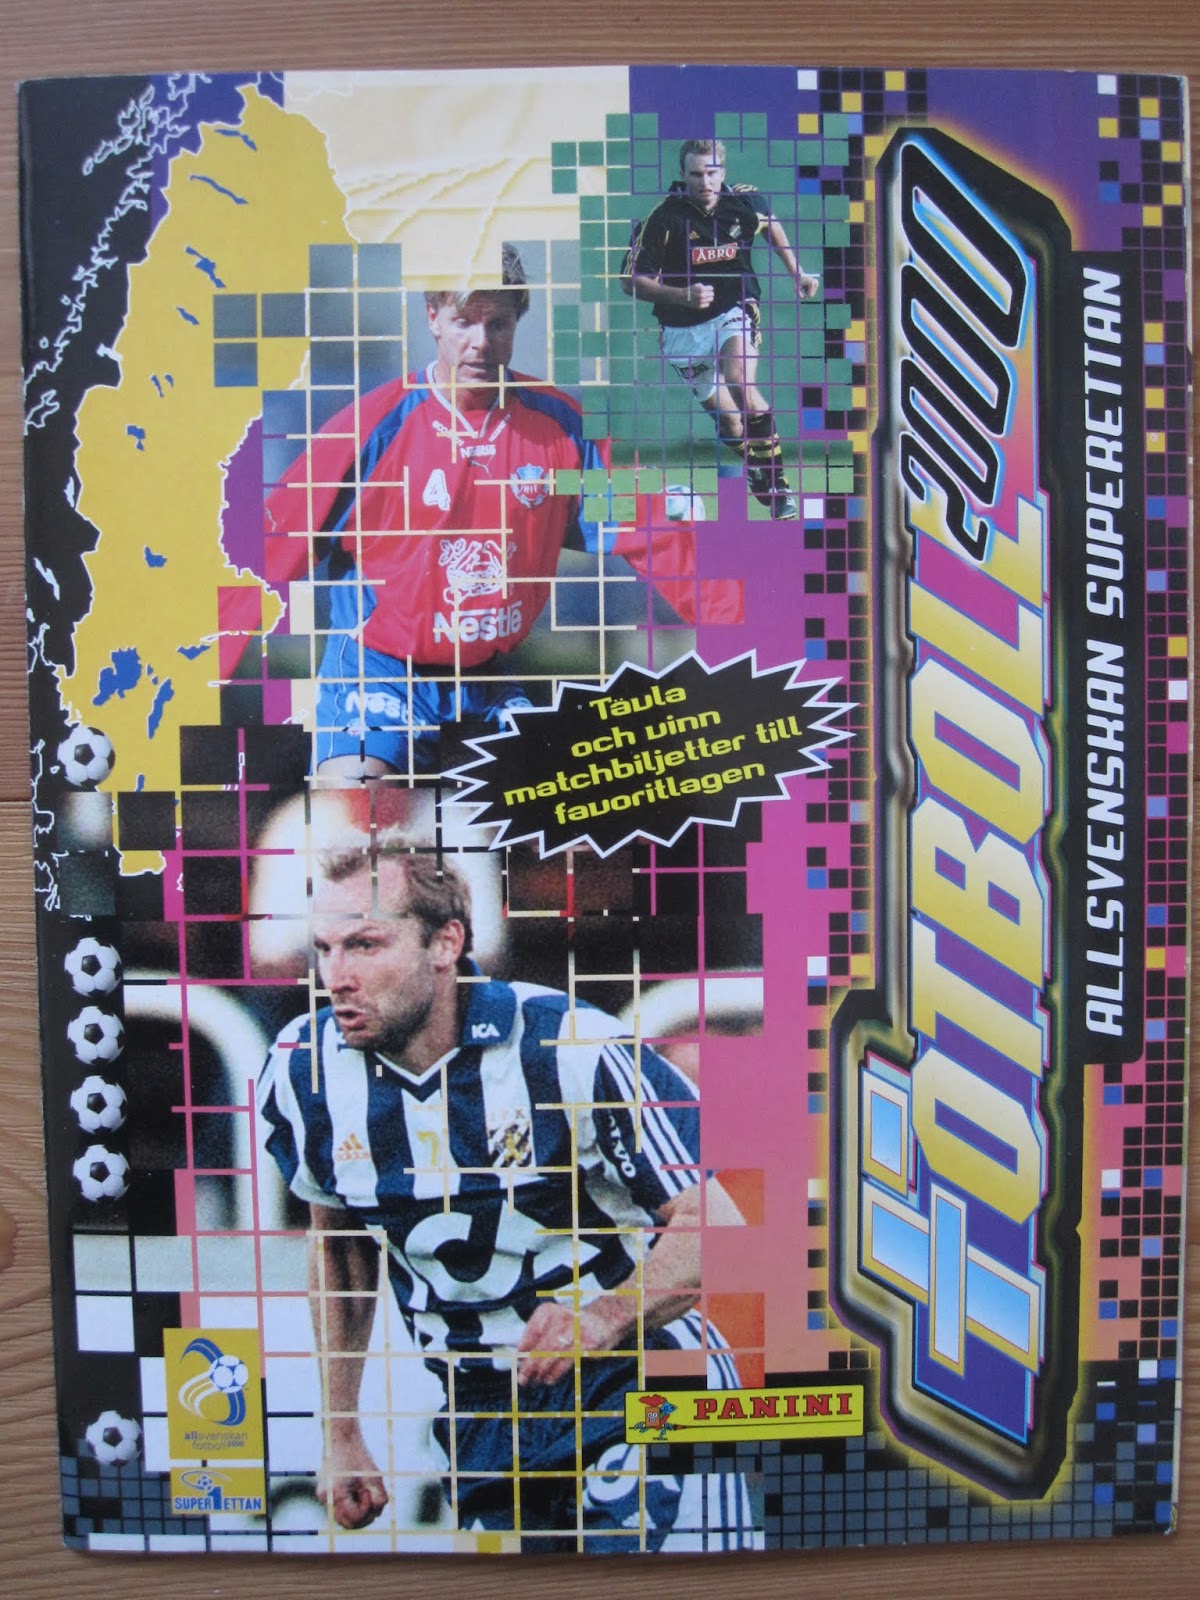 Only Good Stickers: Panini Foot 2000